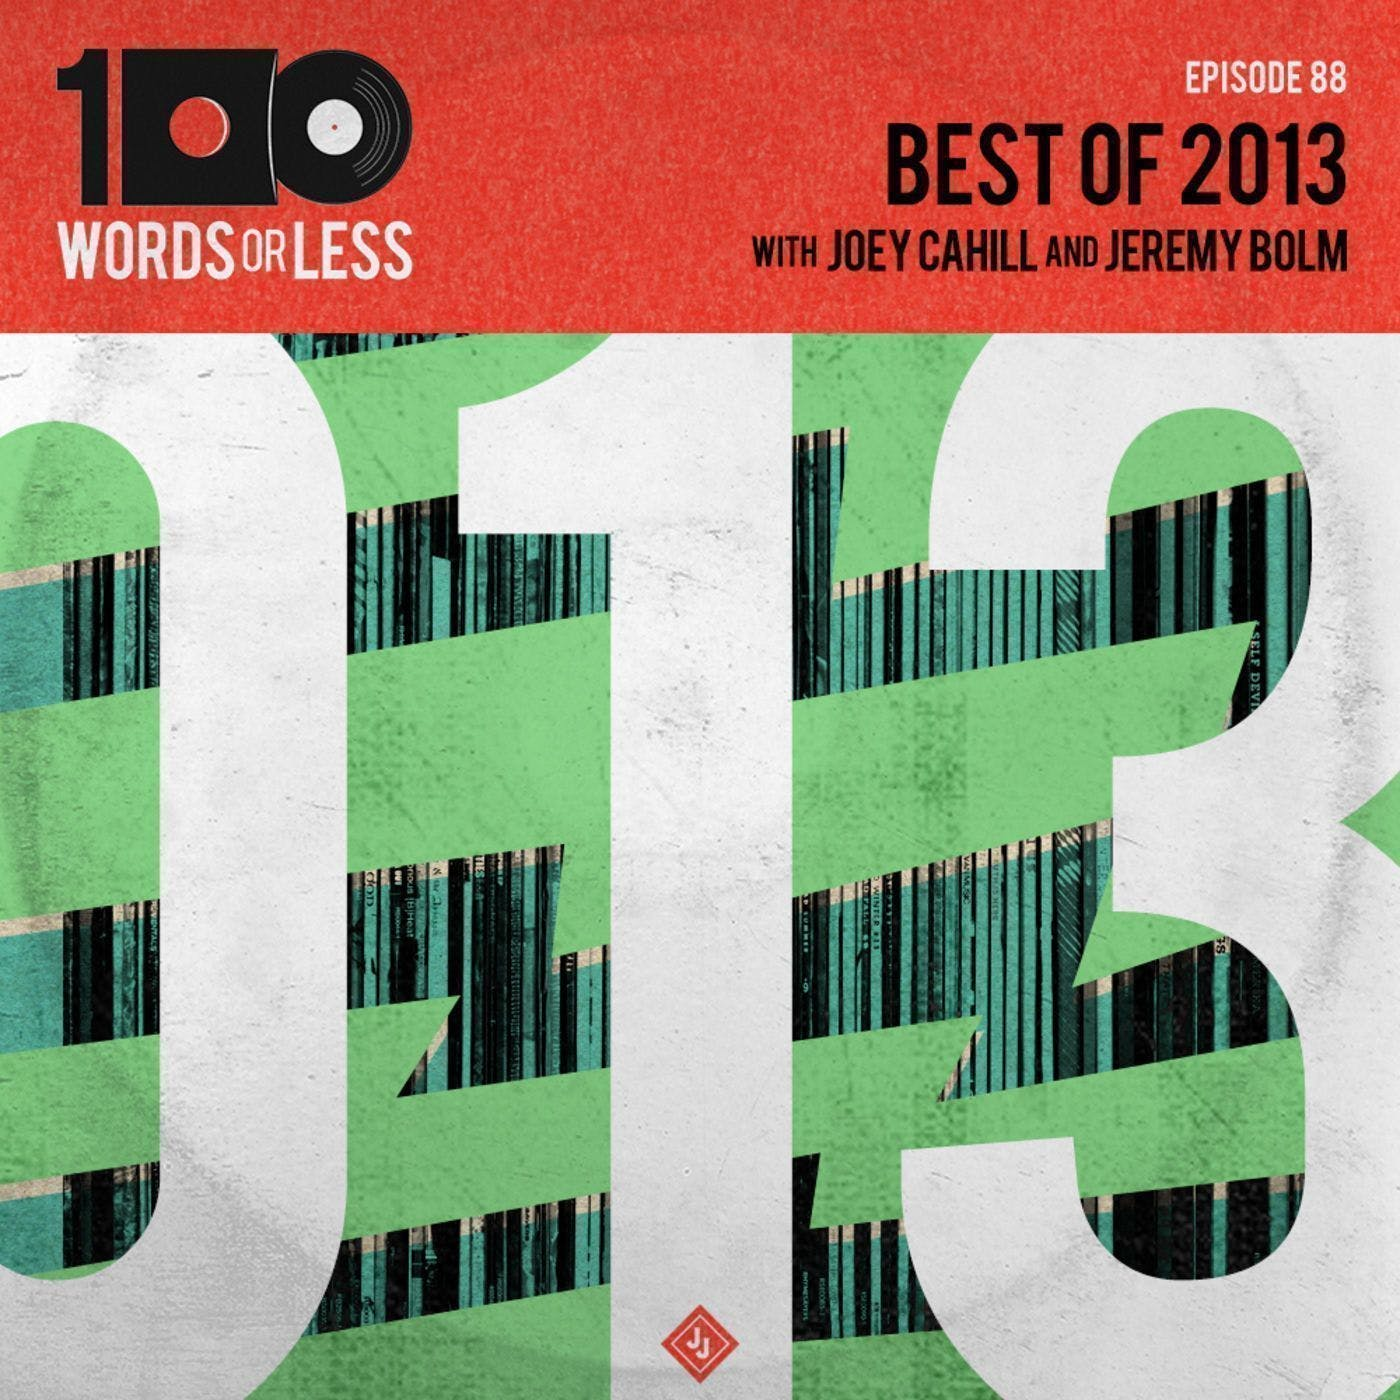 Best of 2013 with Jeremy Bolm (Touche Amore) and Joey Cahill (6131 Records)